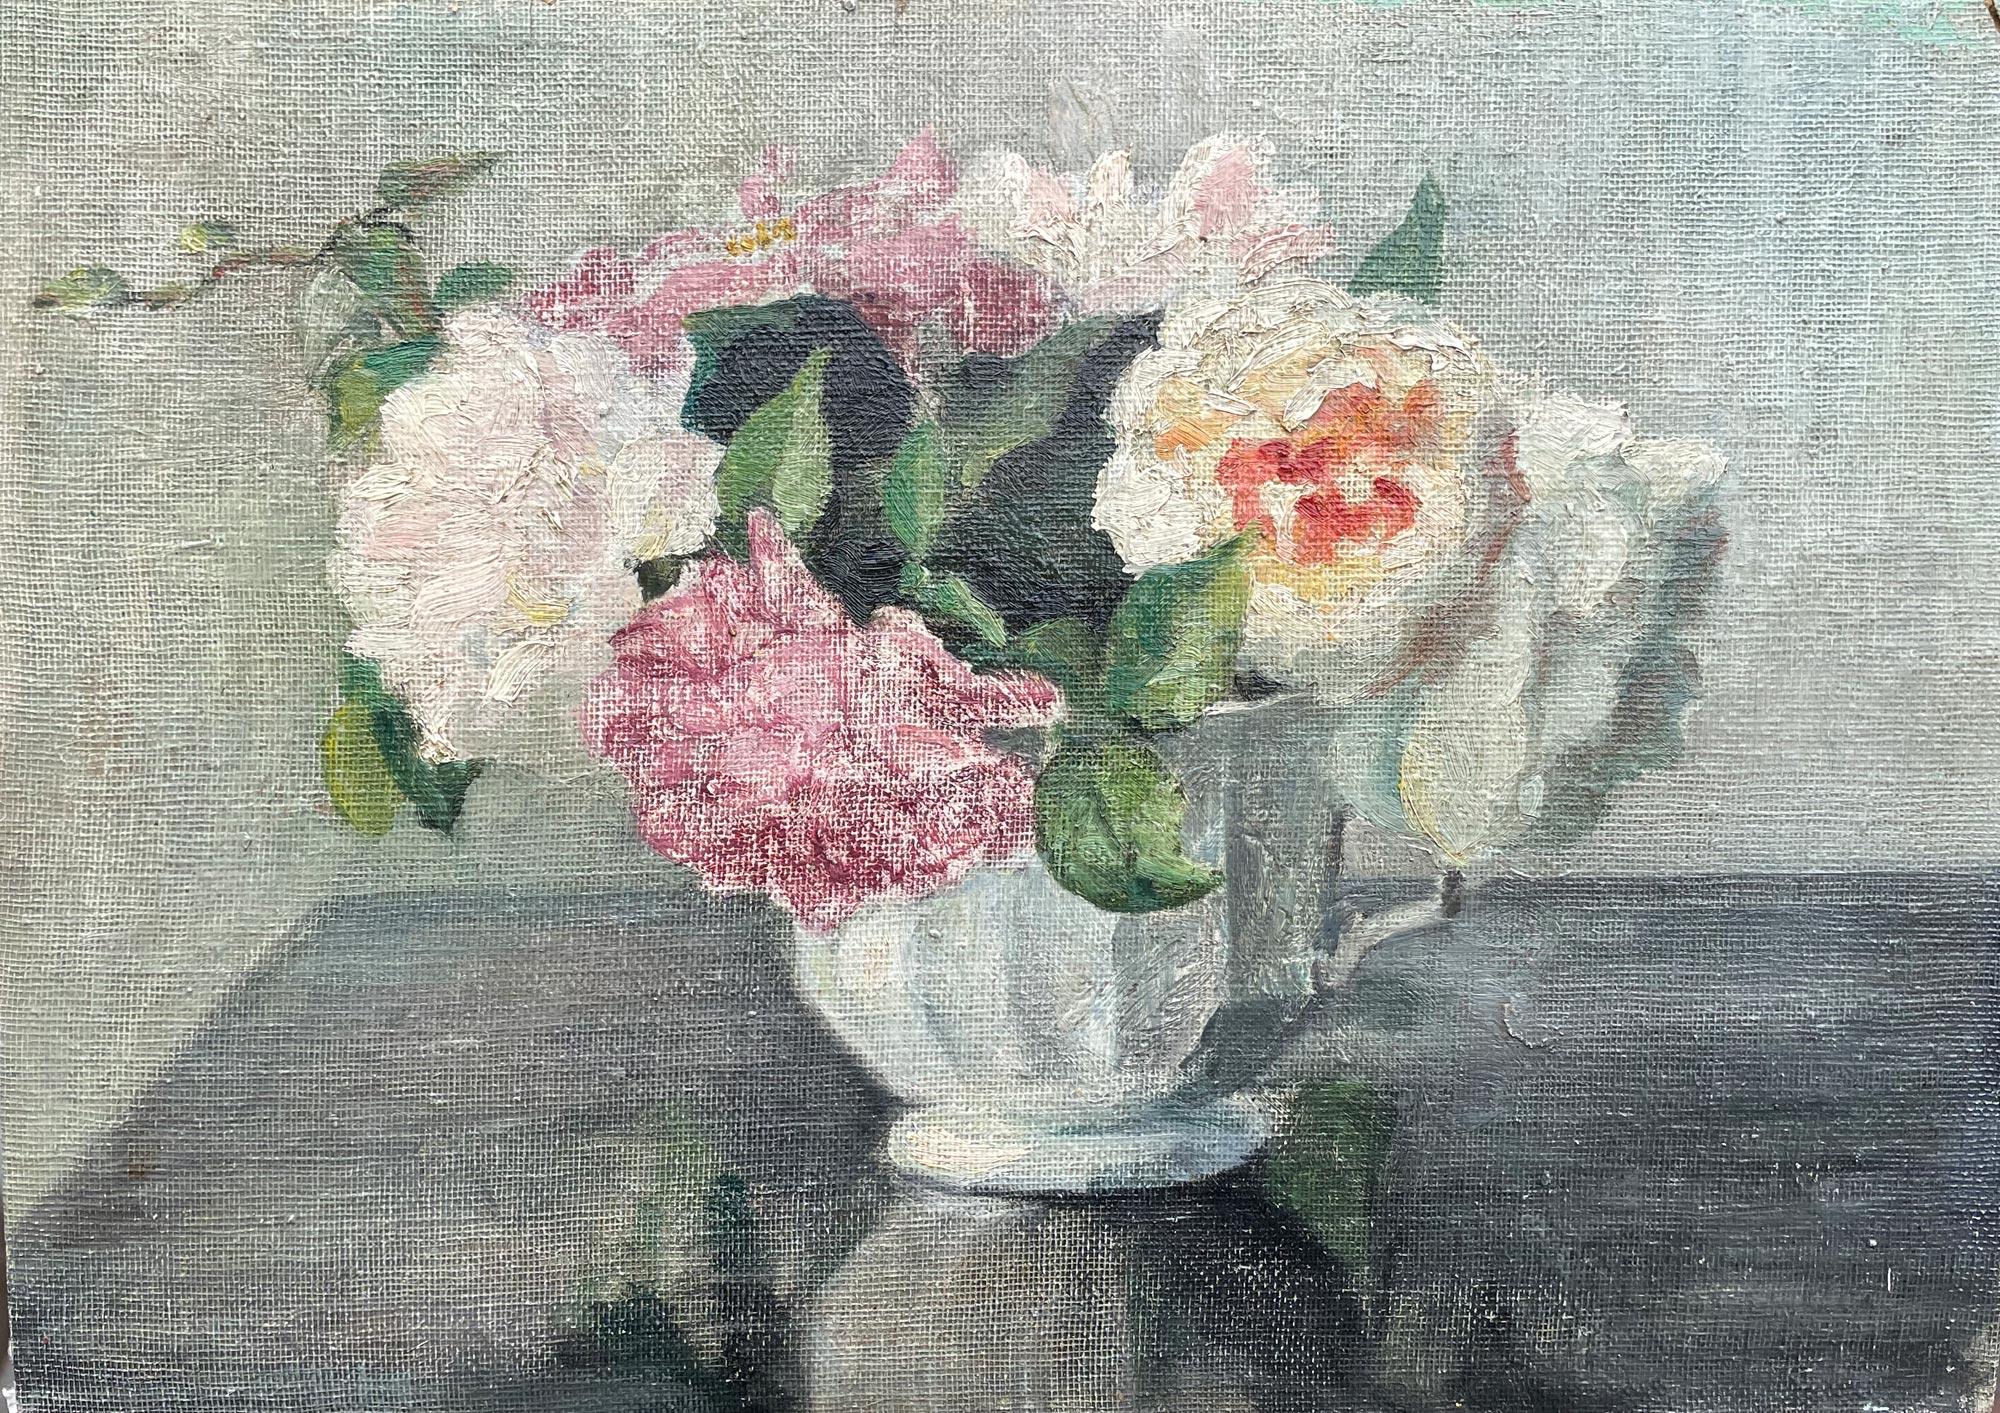 Vase with Roses - Letourneux Yvonne

Measures: 24cm x 34cm (dimensions referring to the canvas only), oil on canvas applied to cardboard - 1950s

Floral arrangement with white vase containing white and pink roses.
 